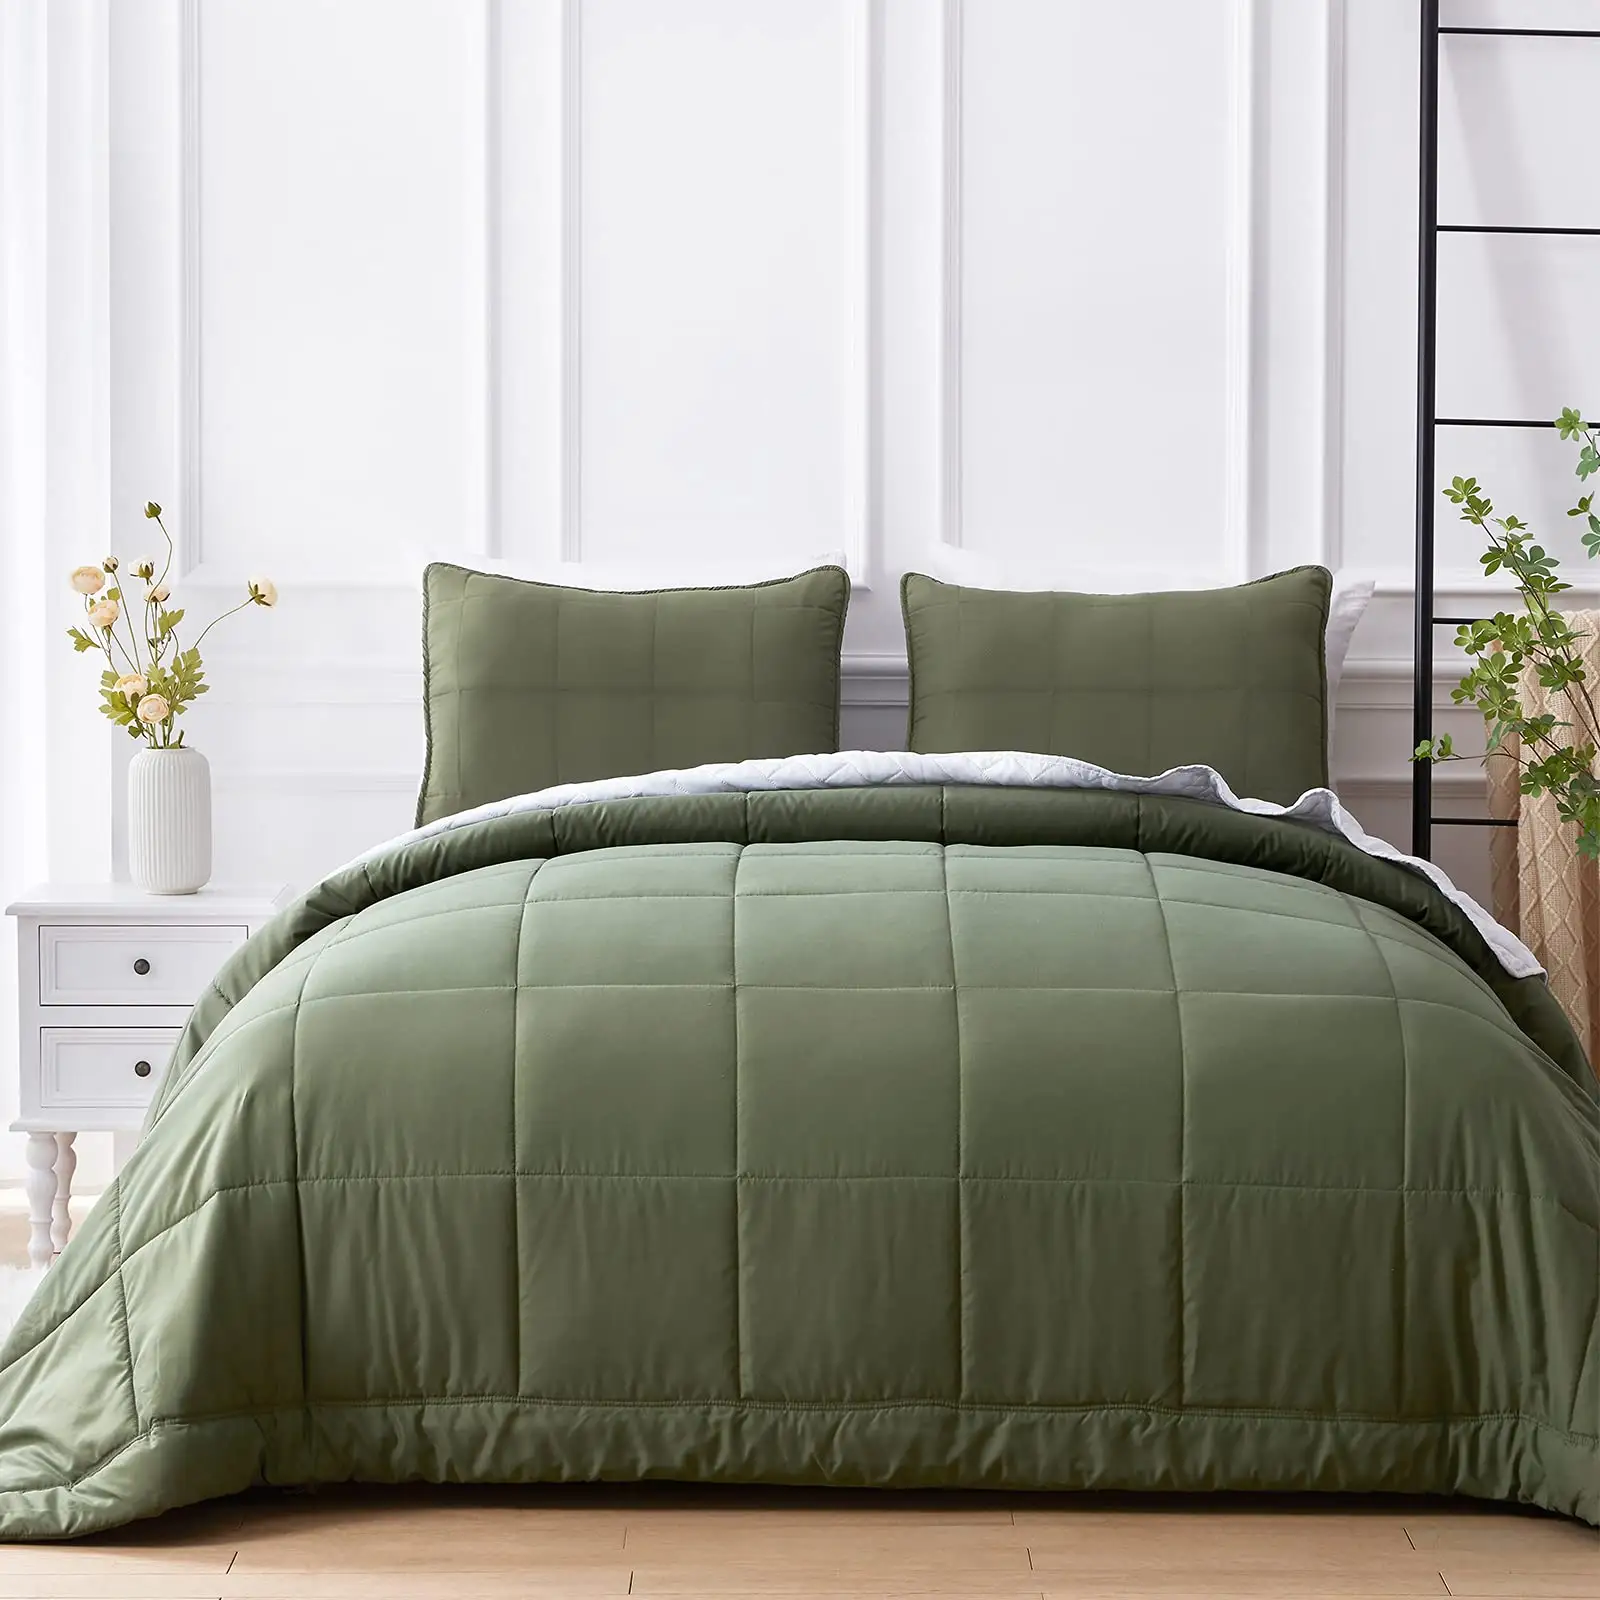 Yuchun Home Textiles Olive Green Lightweight King Size Comforter Square Pattern Comforter Set With 2 Pillow Shams